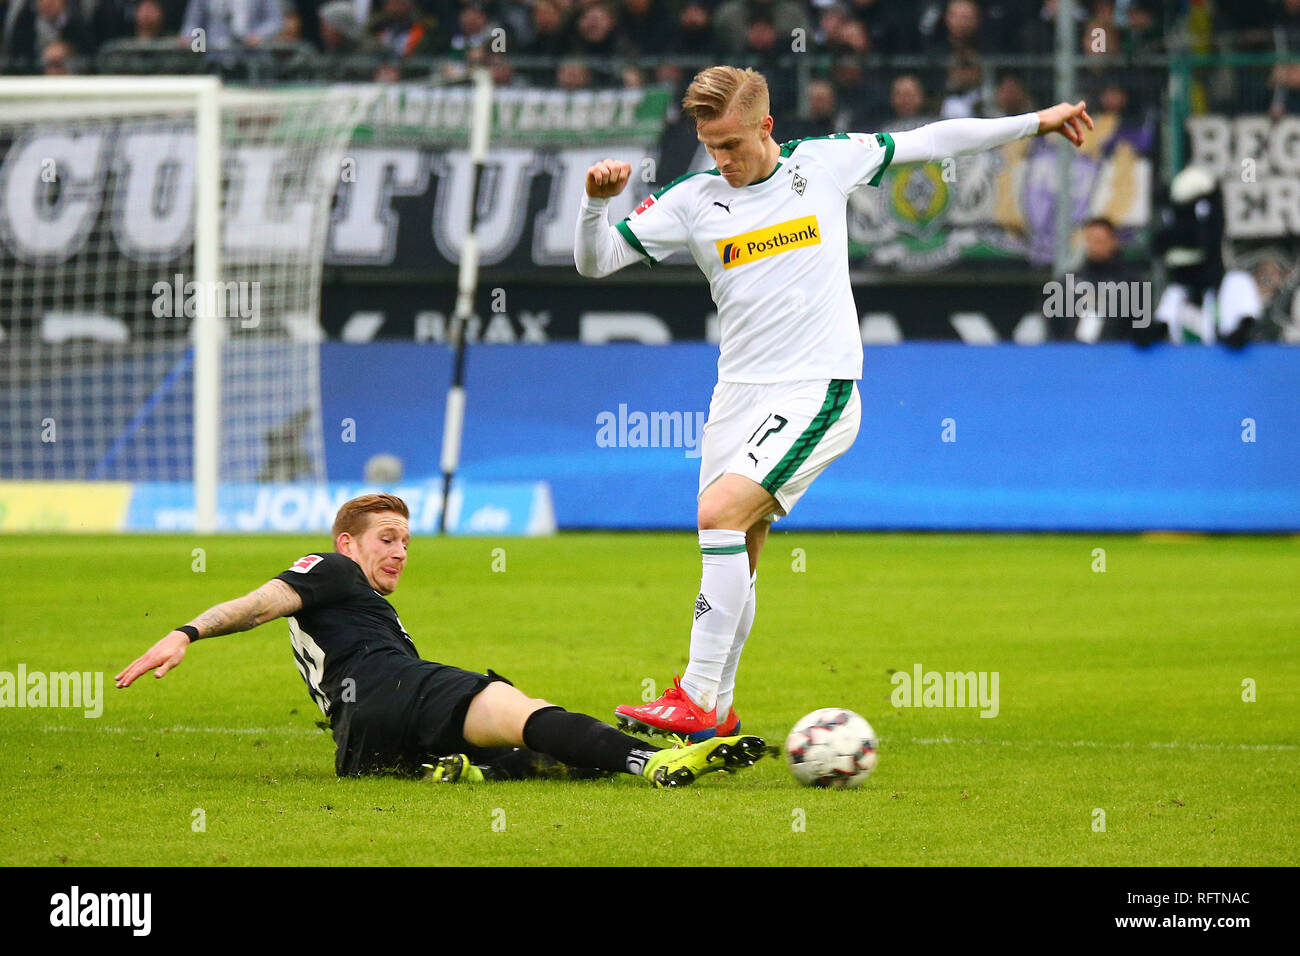 Moenchengladbach, Germany. 26th Jan, 2019. Andre Hahn (L) of Augsburg vies with Oscar Wendt of Moenchengladbach during the Bundesliga match between Borussia Moenchengladbach and FC Augsburg in Moenchengladbach, Germany, Jan. 26, 2019. Moenchengladbach won 2-0. Credit: Ulrich Hufnagel/Xinhua/Alamy Live News Stock Photo